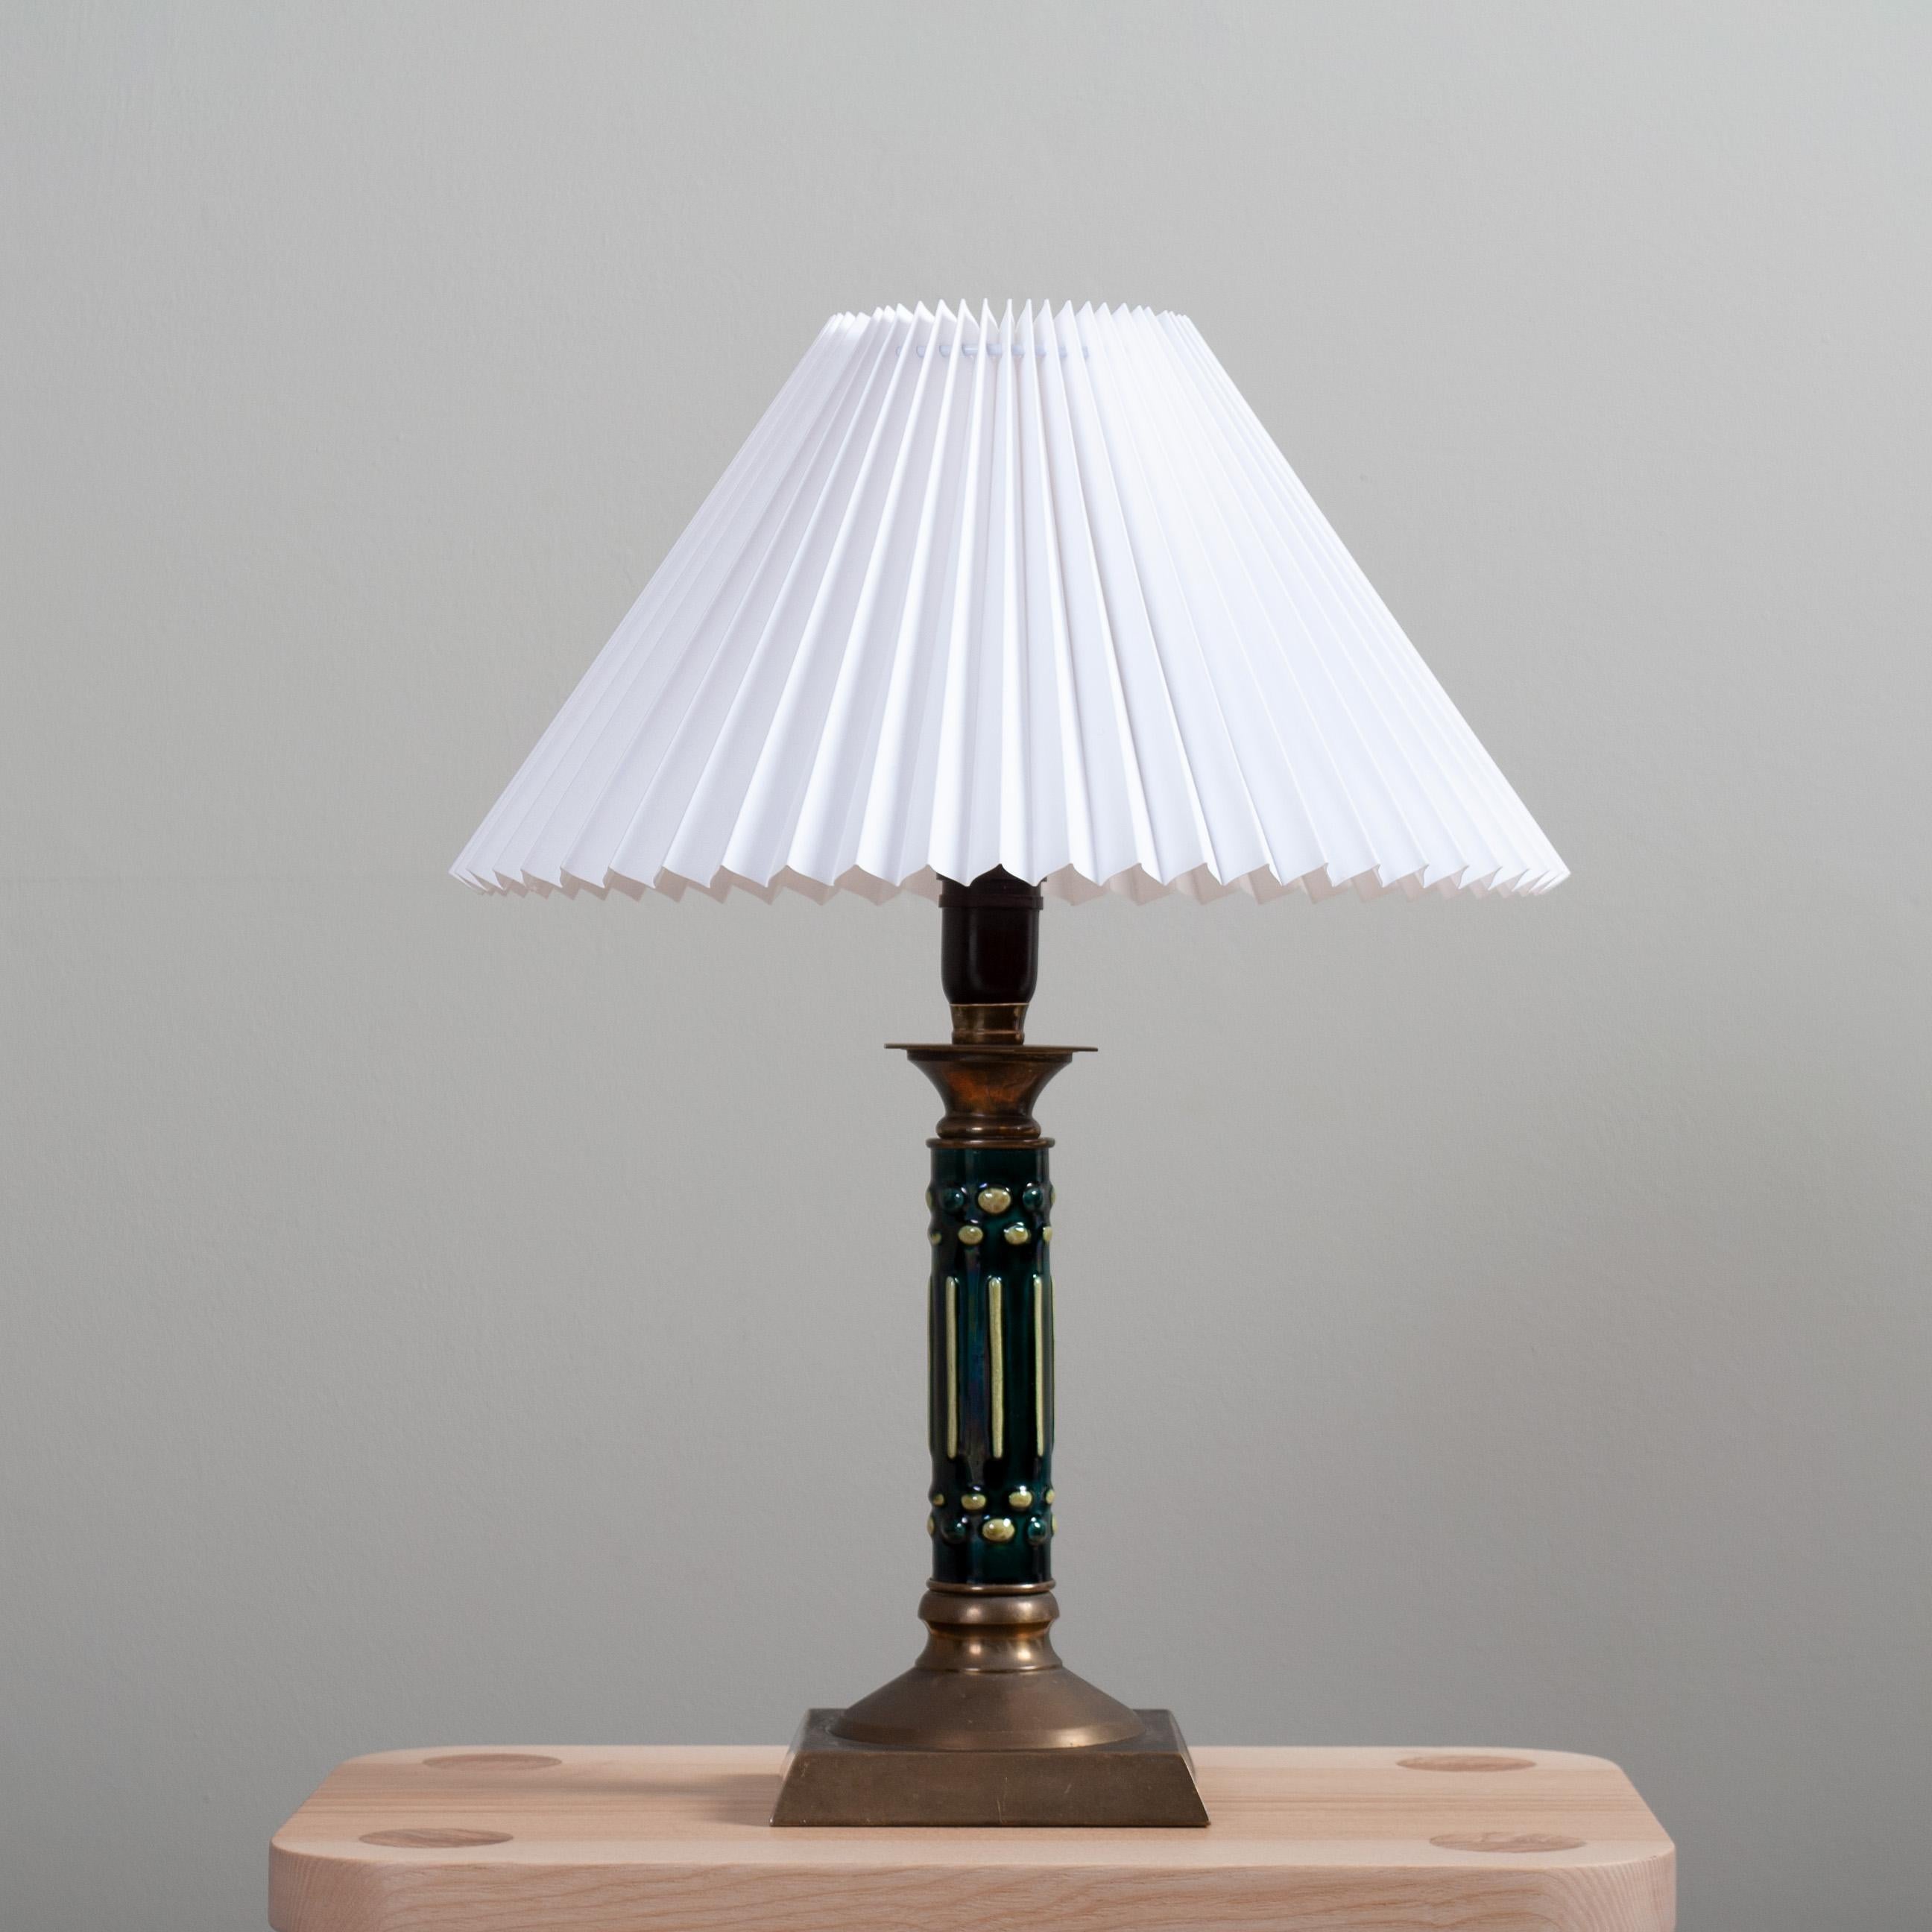 Unusual Swedish ceramic and brass table lamp from the 1930's deco period. 
Lovely design and coloured ceramic upright with solid brass upper and lower parts. The classic Scandinavian pleated clip-on shade is included. Rewired - and can be used in